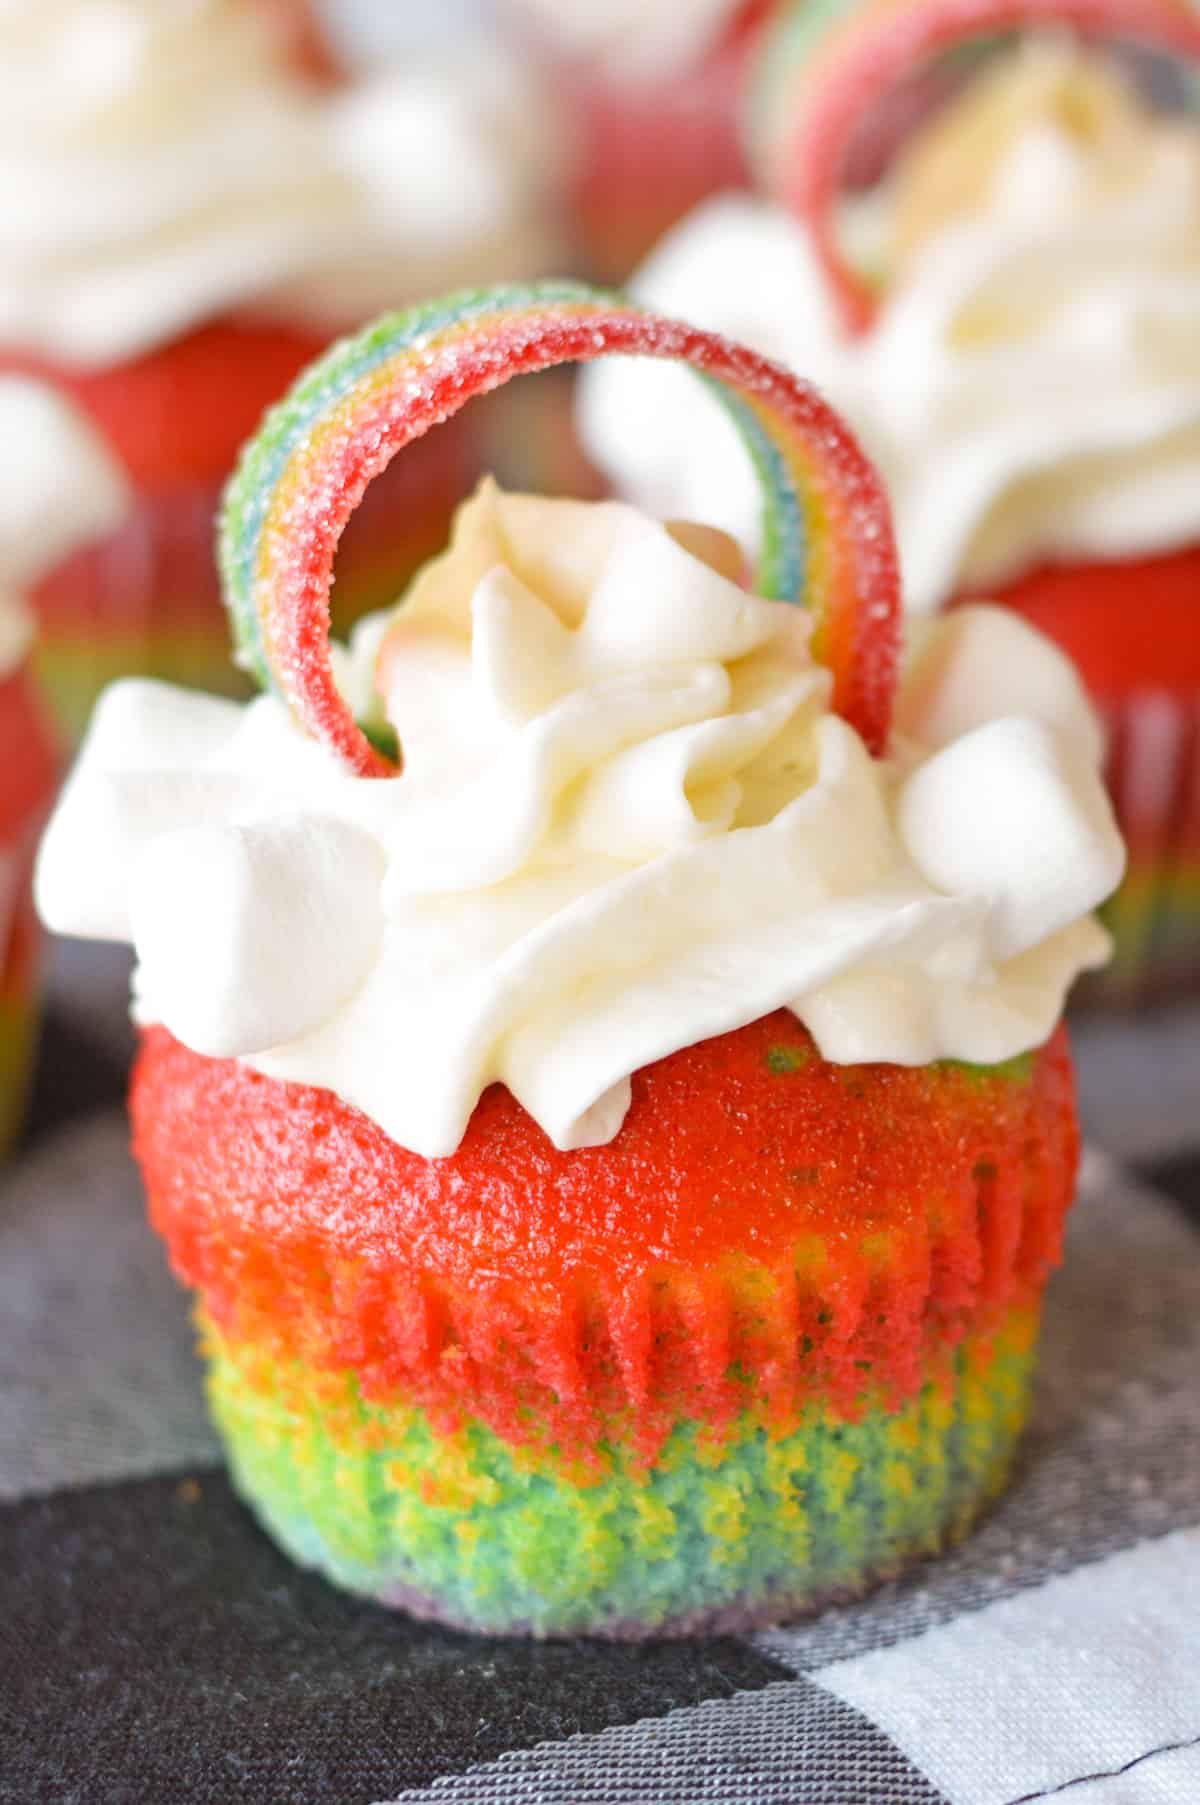 Rainbow Cupcakes with whipped cream cream cheese frosting and decorated with rainbow candy on top.